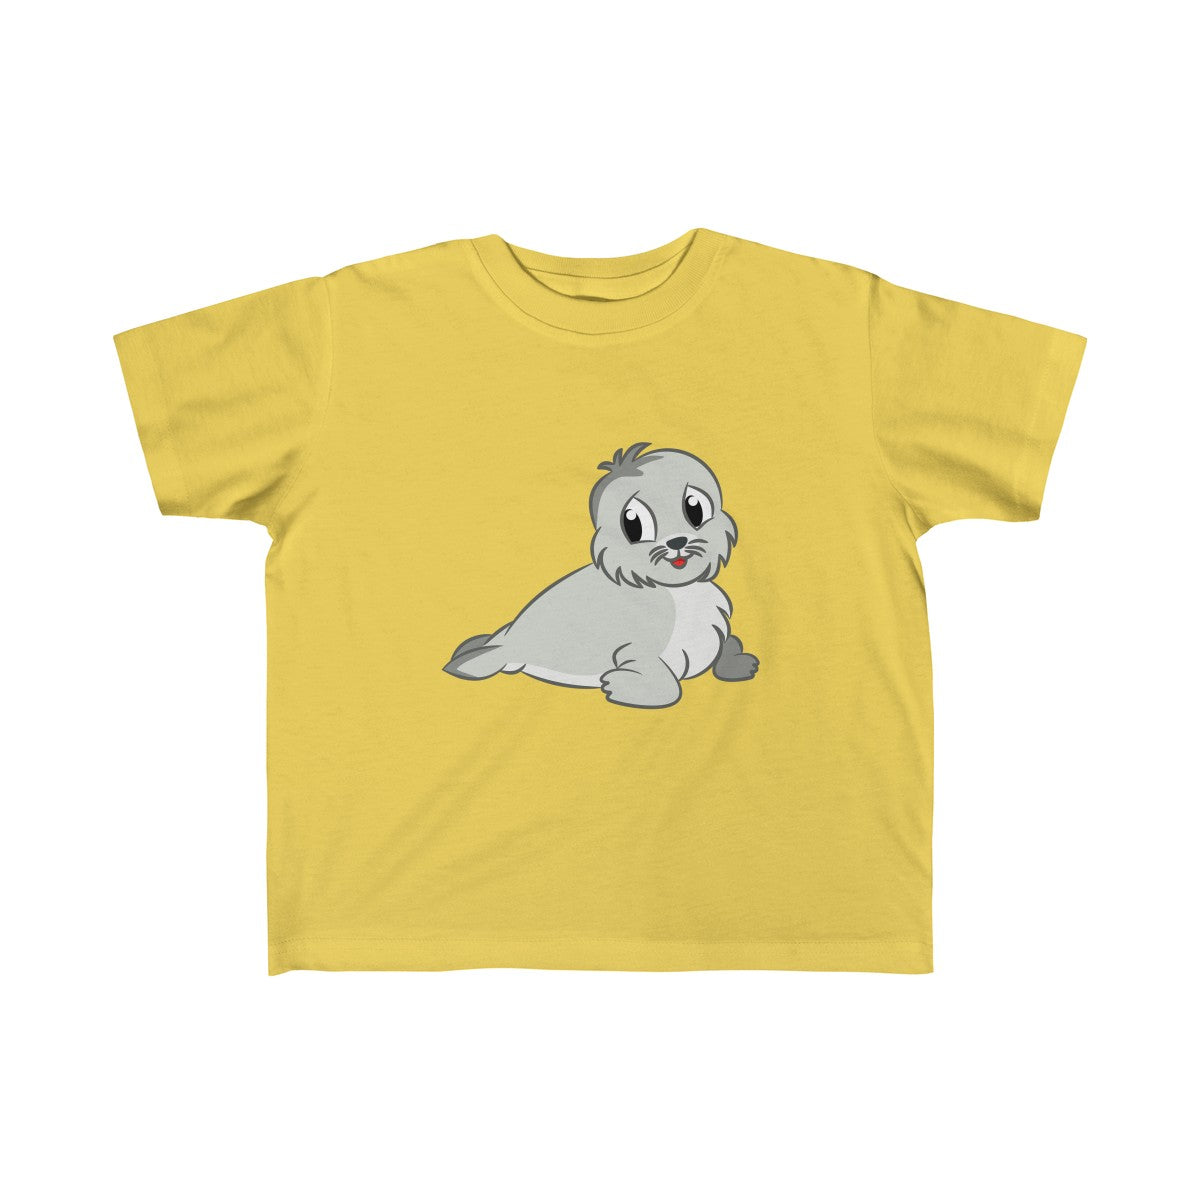 Cute Baby Seal Toddler Fine Jersey Tee-Kids clothes-PureDesignTees